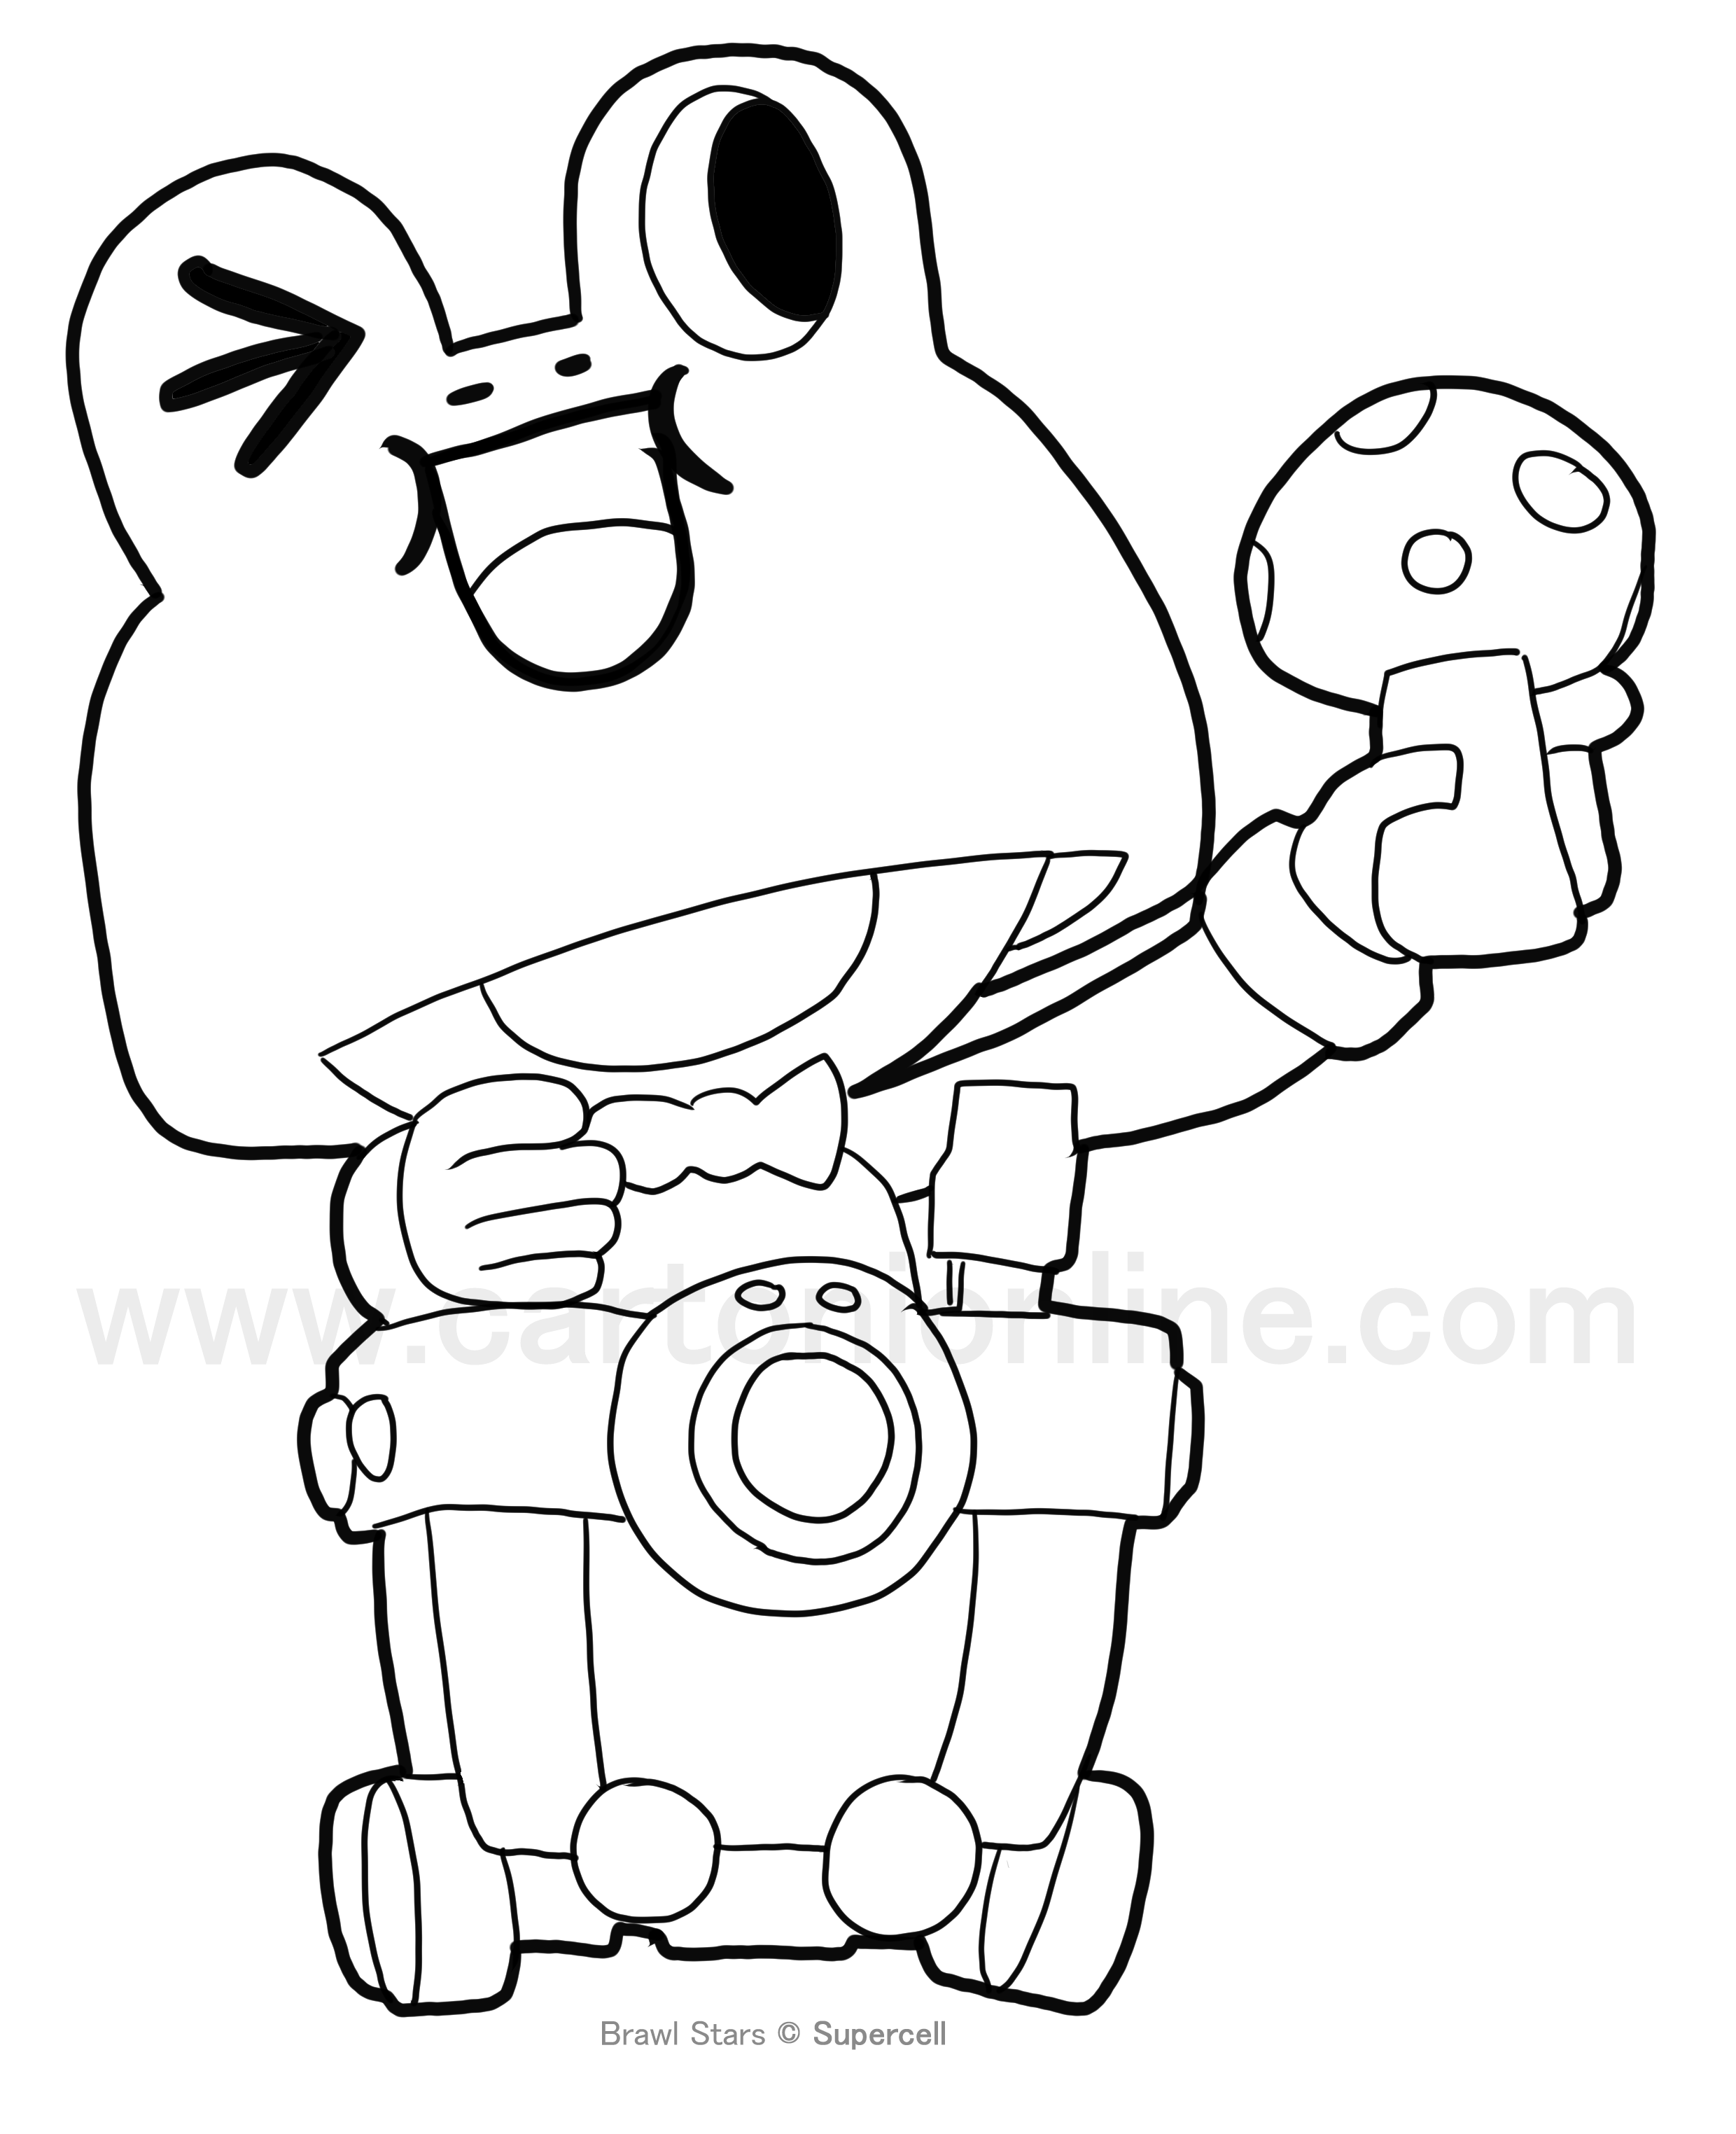 Leonard Carl Brawl Stars coloring page to print and coloring